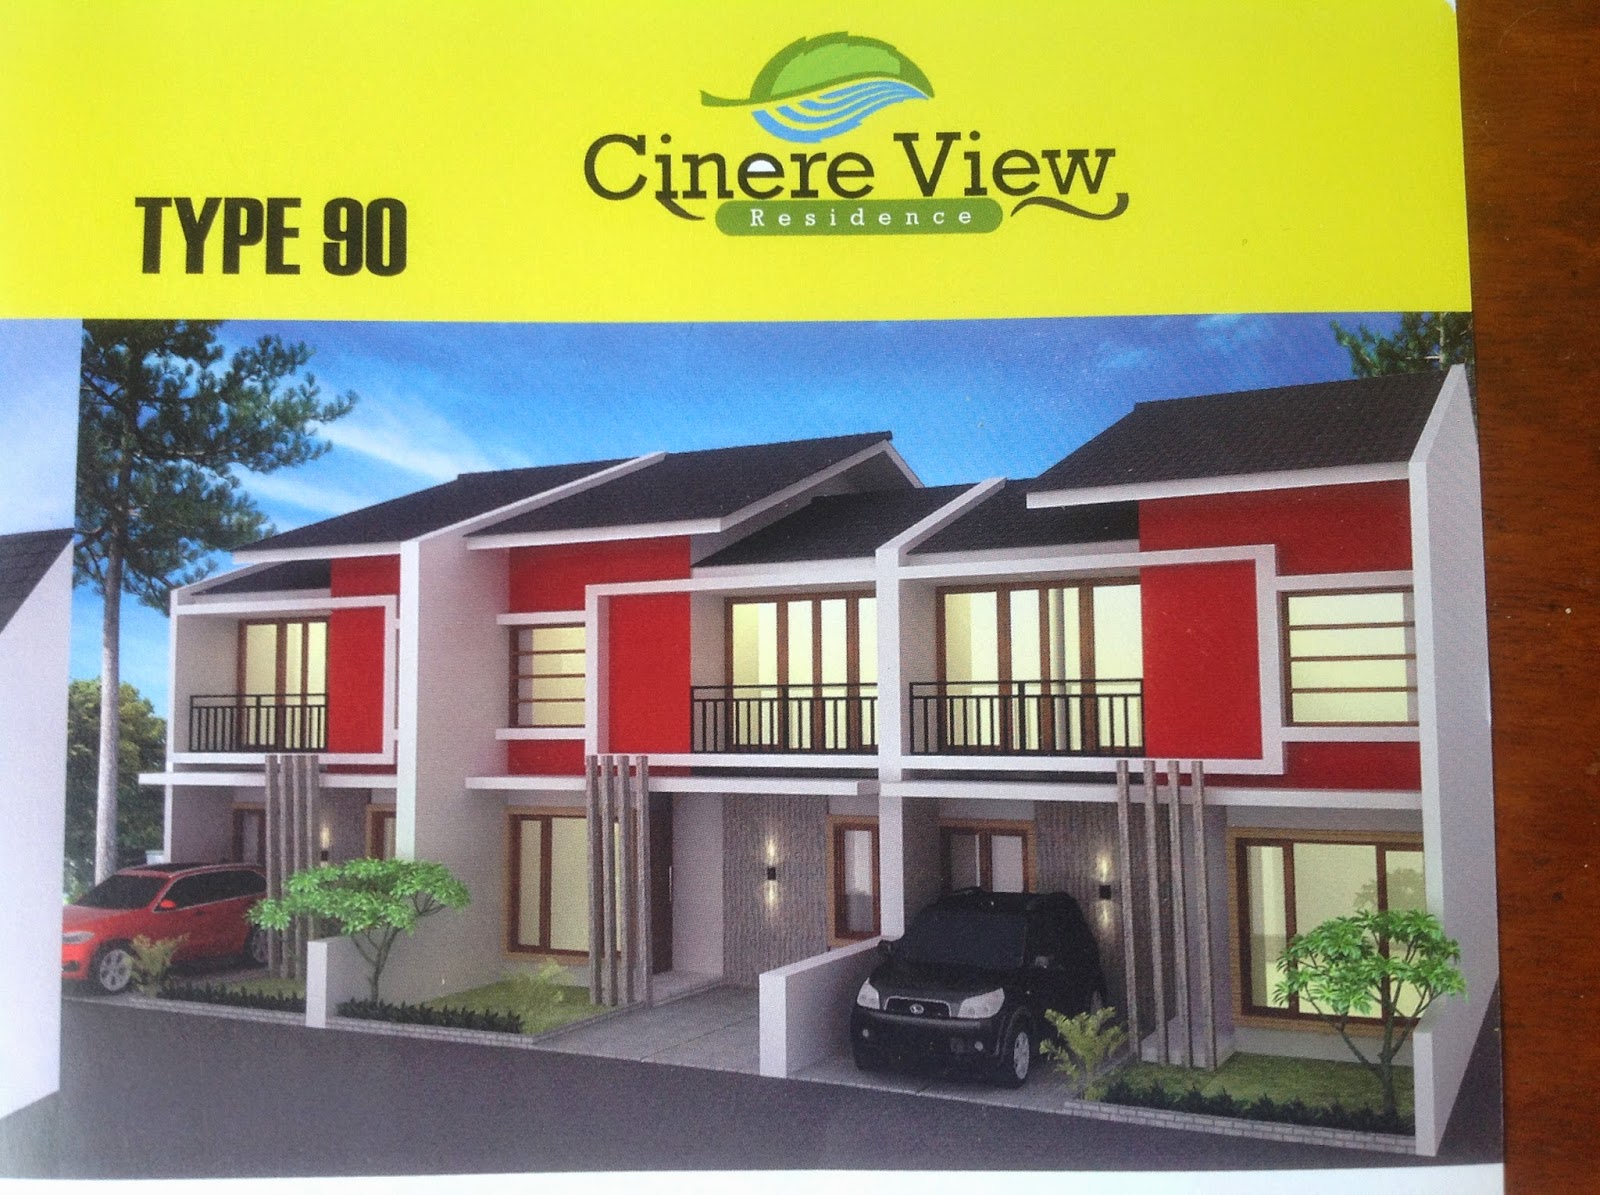 CLUSTER CINERE VIEW RESIDENCE ~ CLUSTER CINERE VIEW RESIDENCE